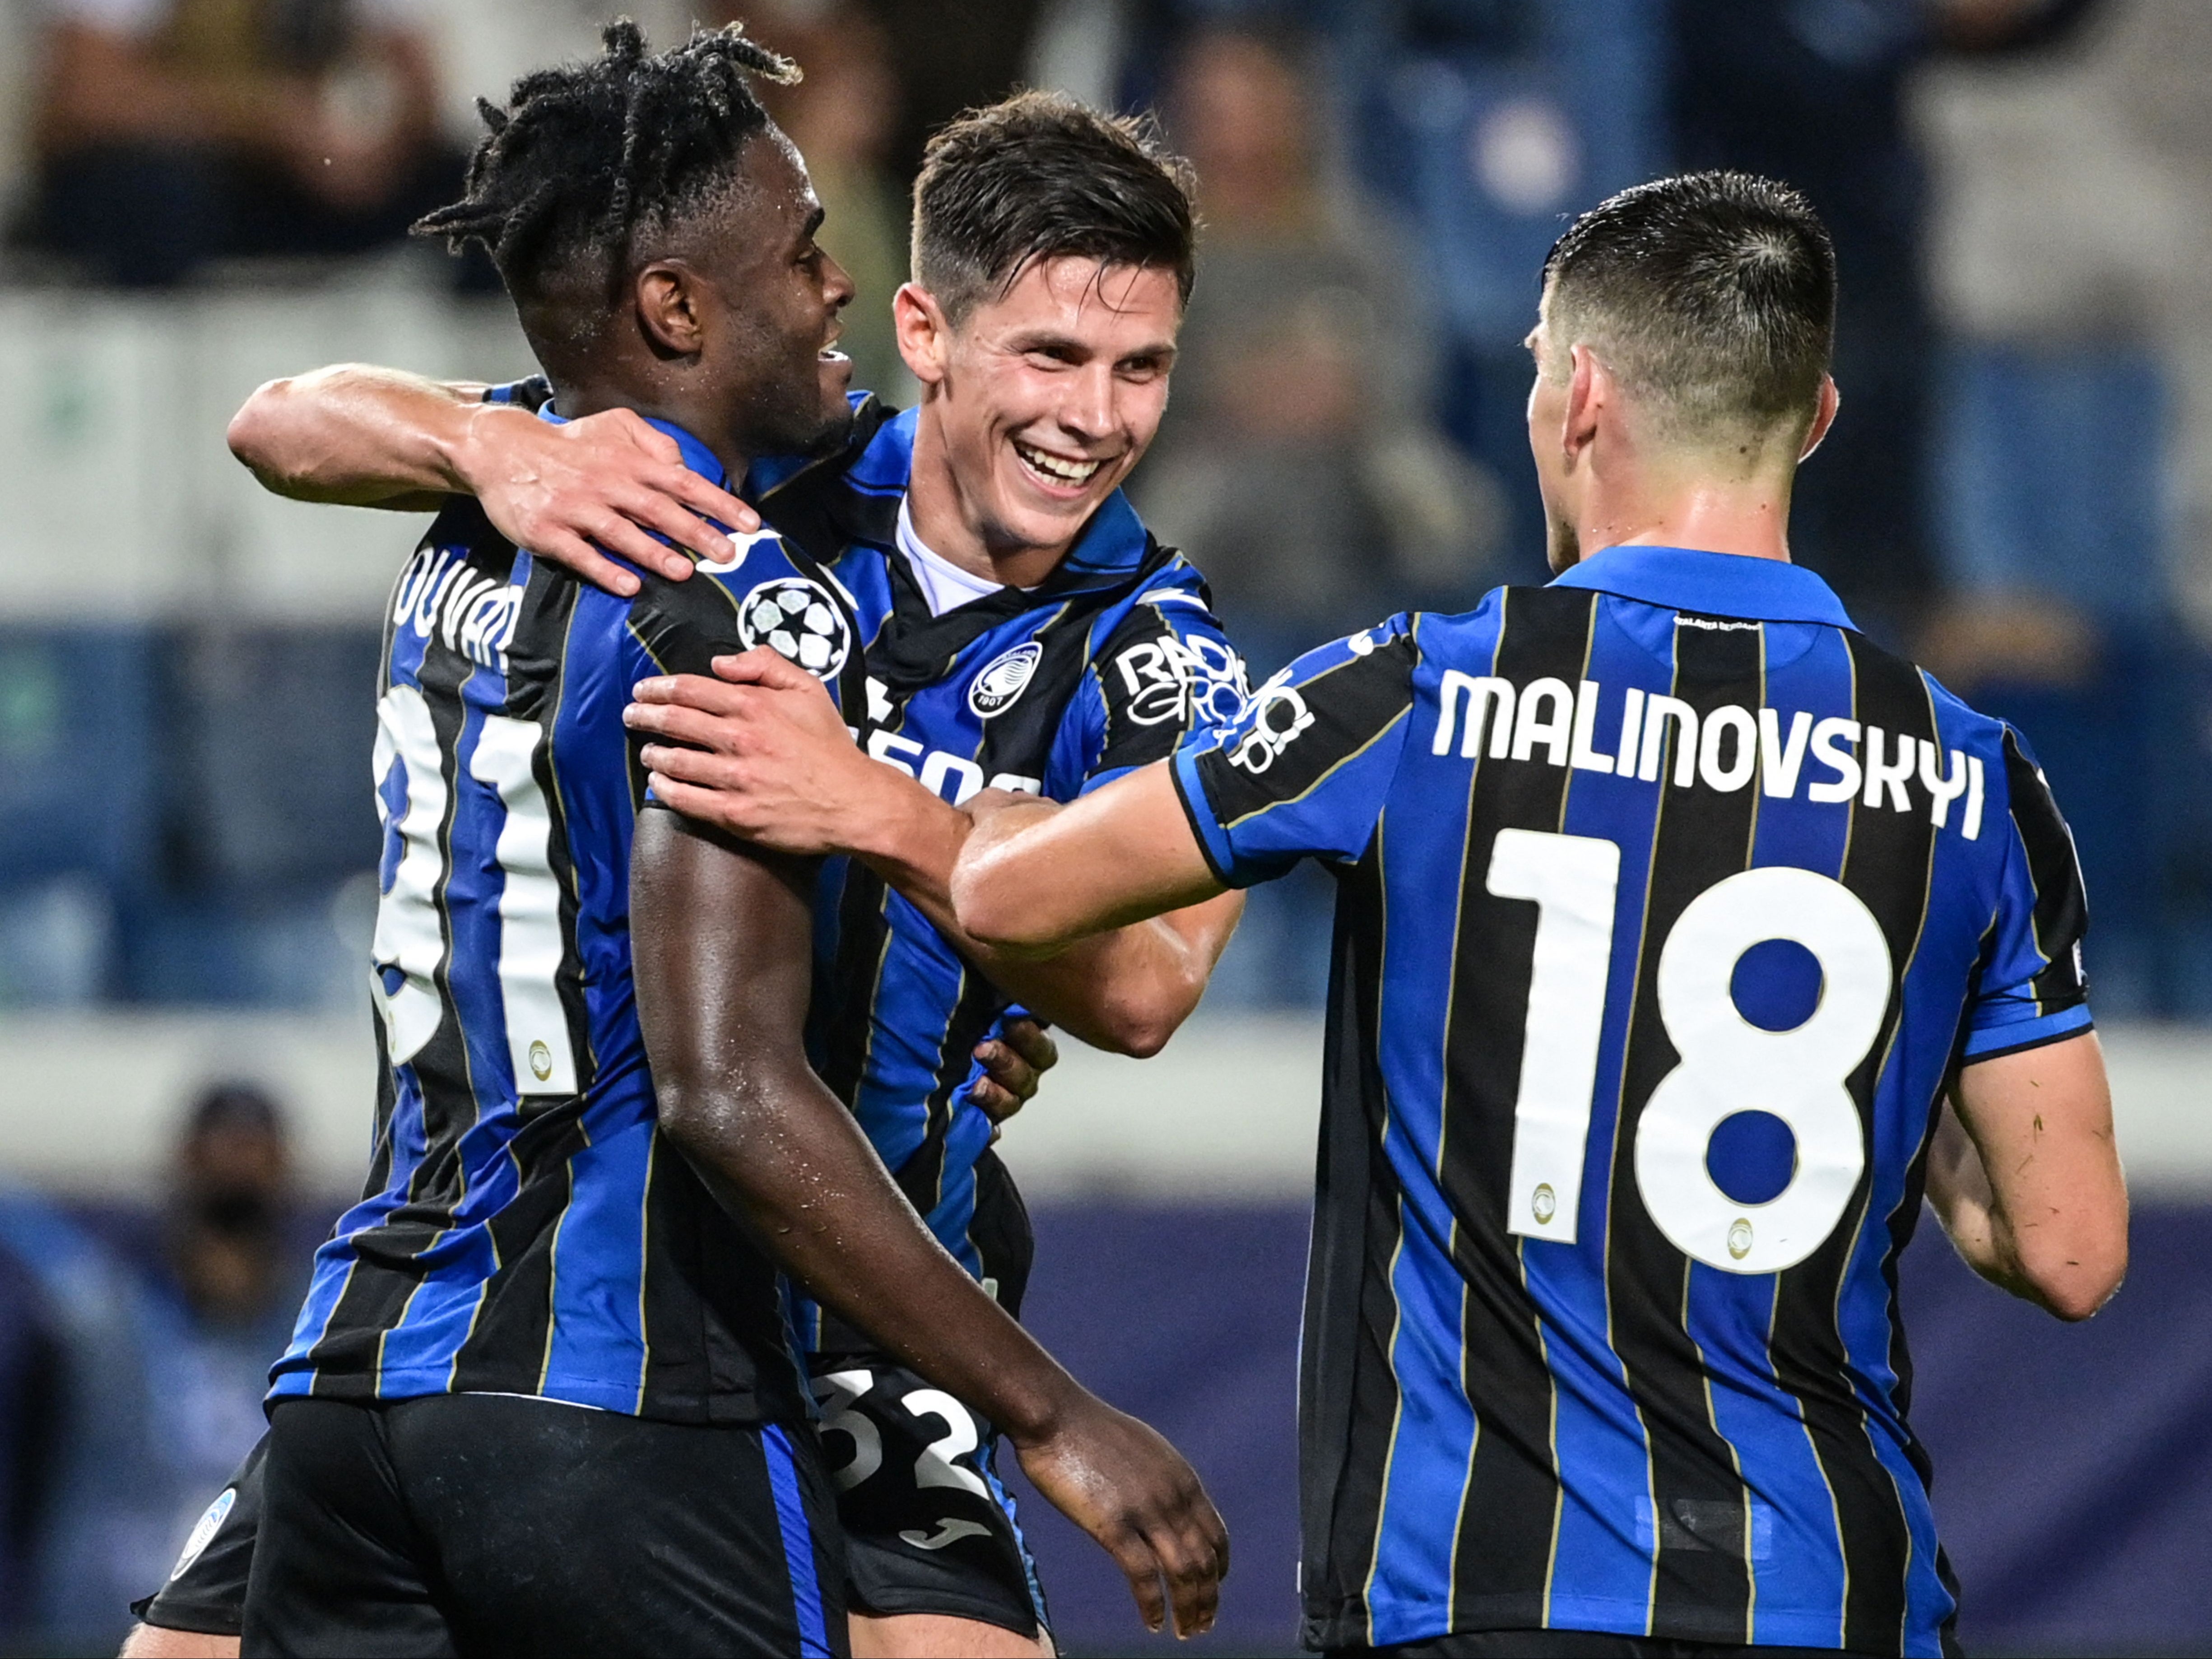 Atalanta have consistently performed above expectations over the last few years in Serie A